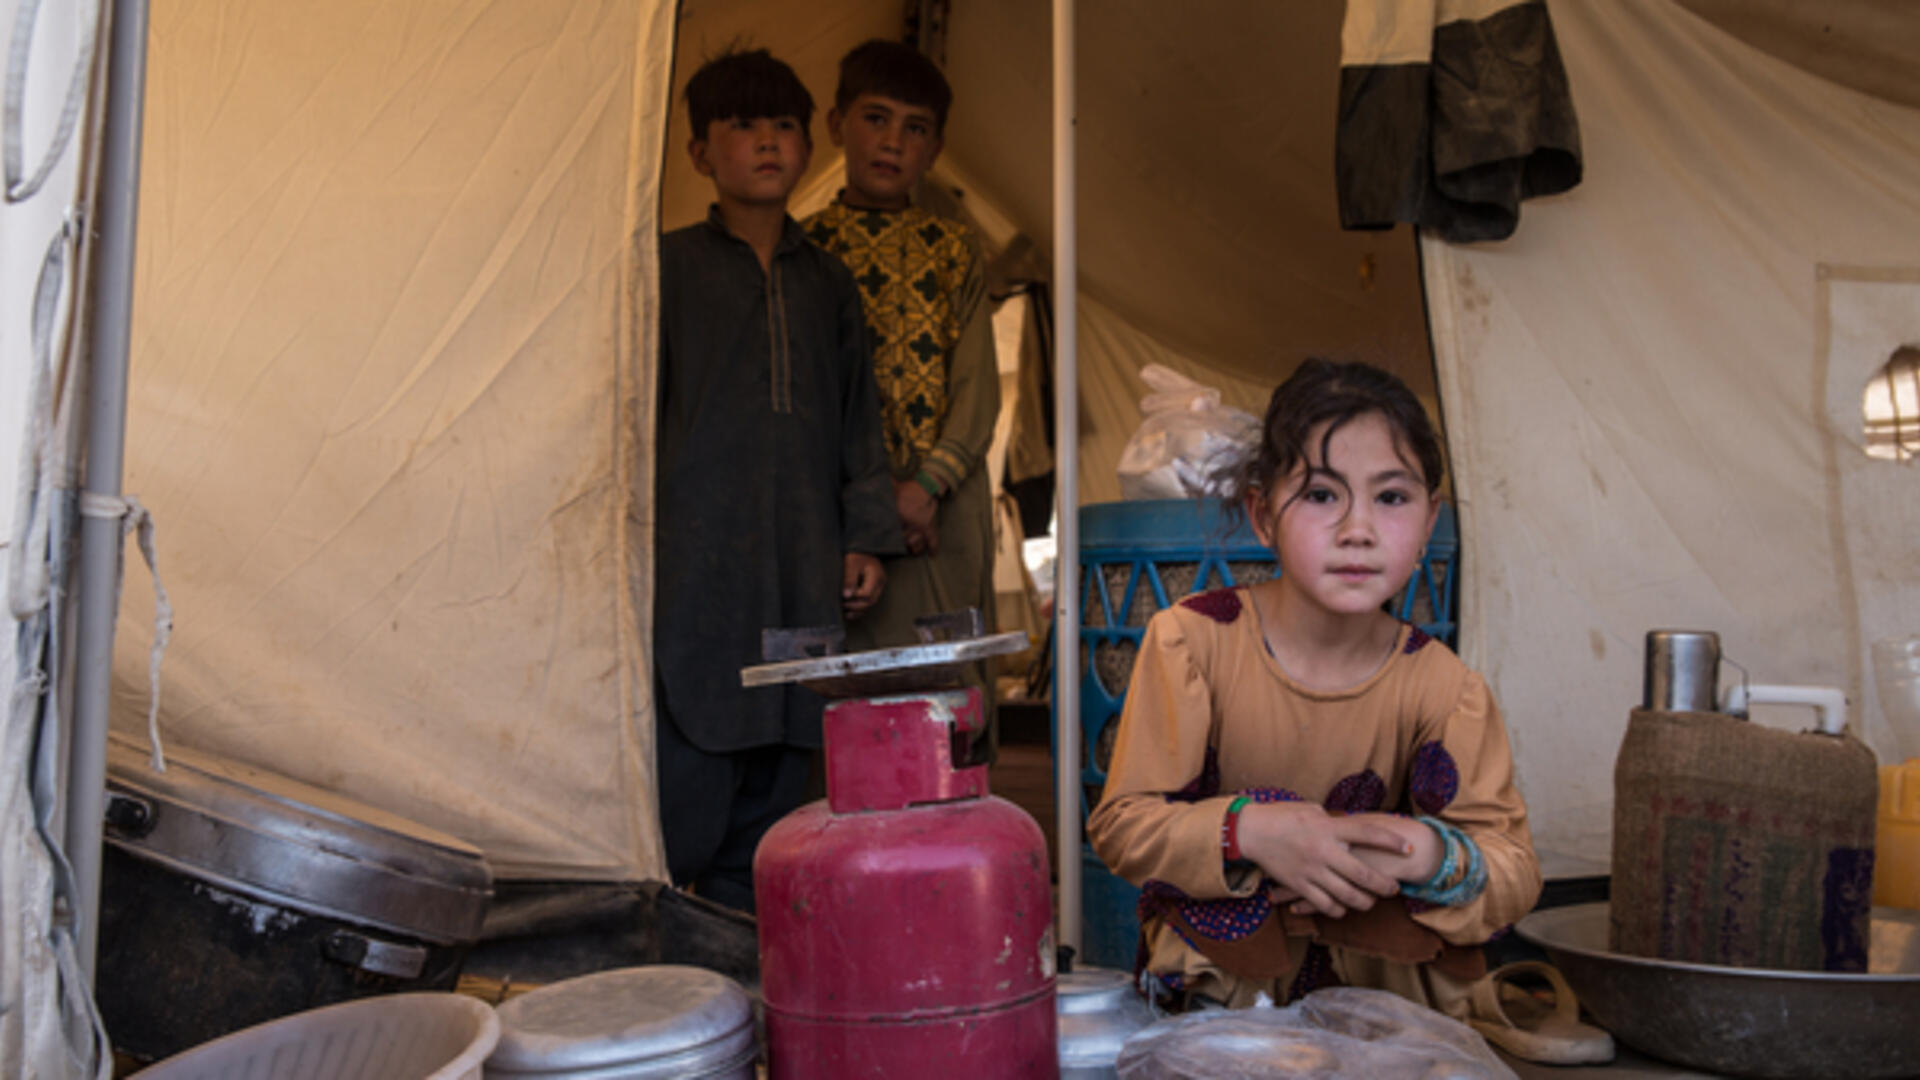 Three children at the entrance to a tent in Badghis, Afghanistan where their family is living after being displaced by drought.